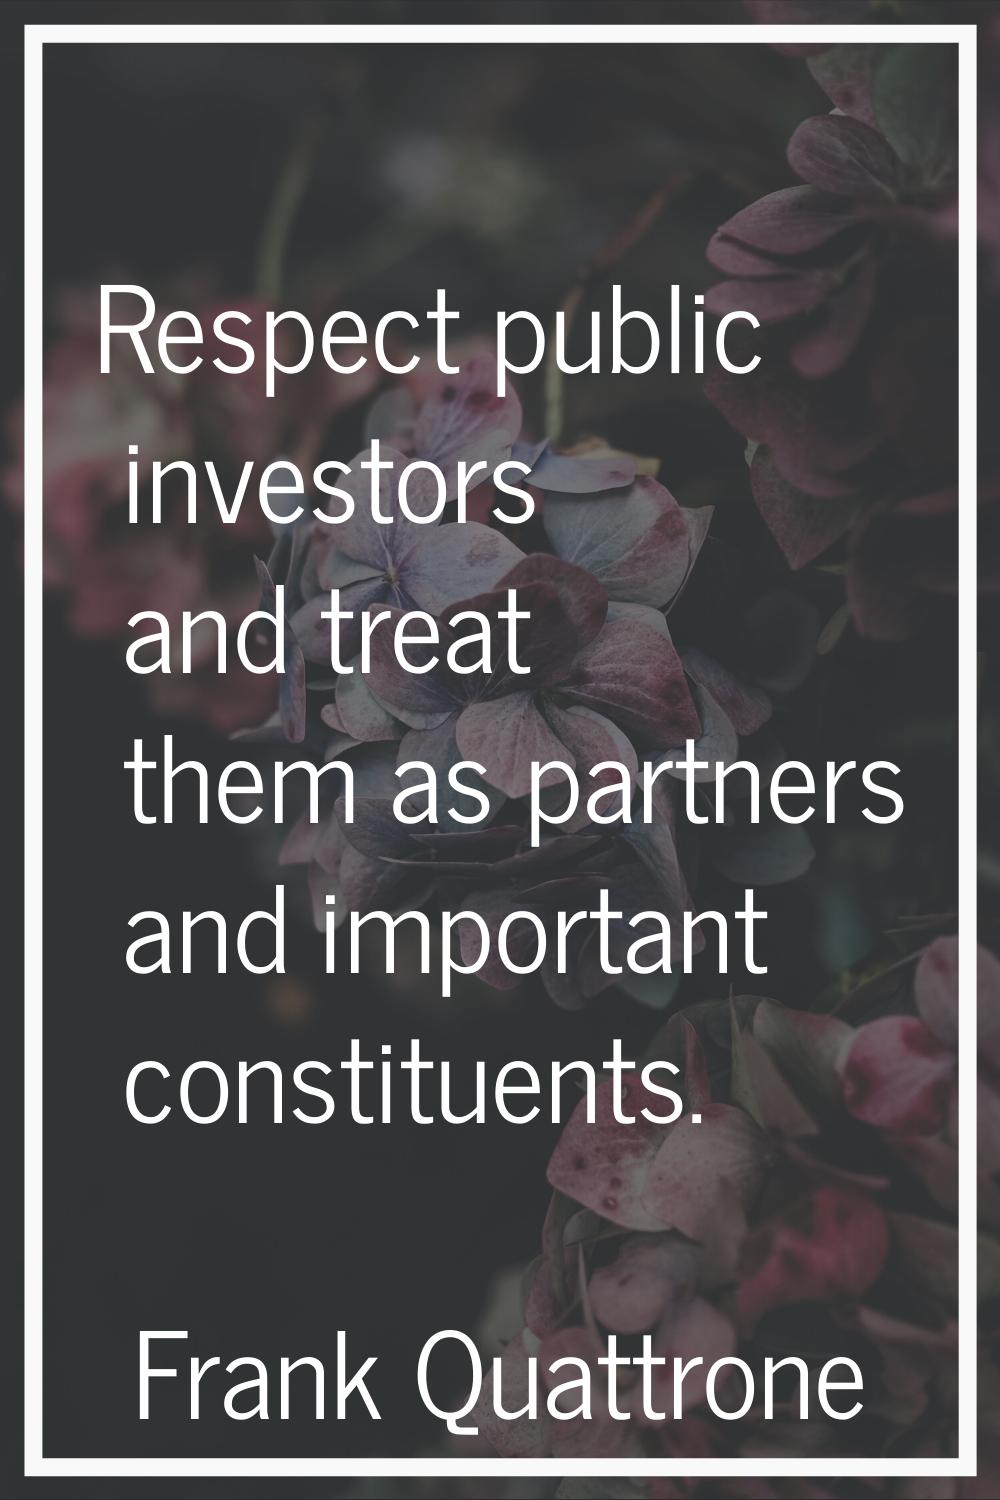 Respect public investors and treat them as partners and important constituents.